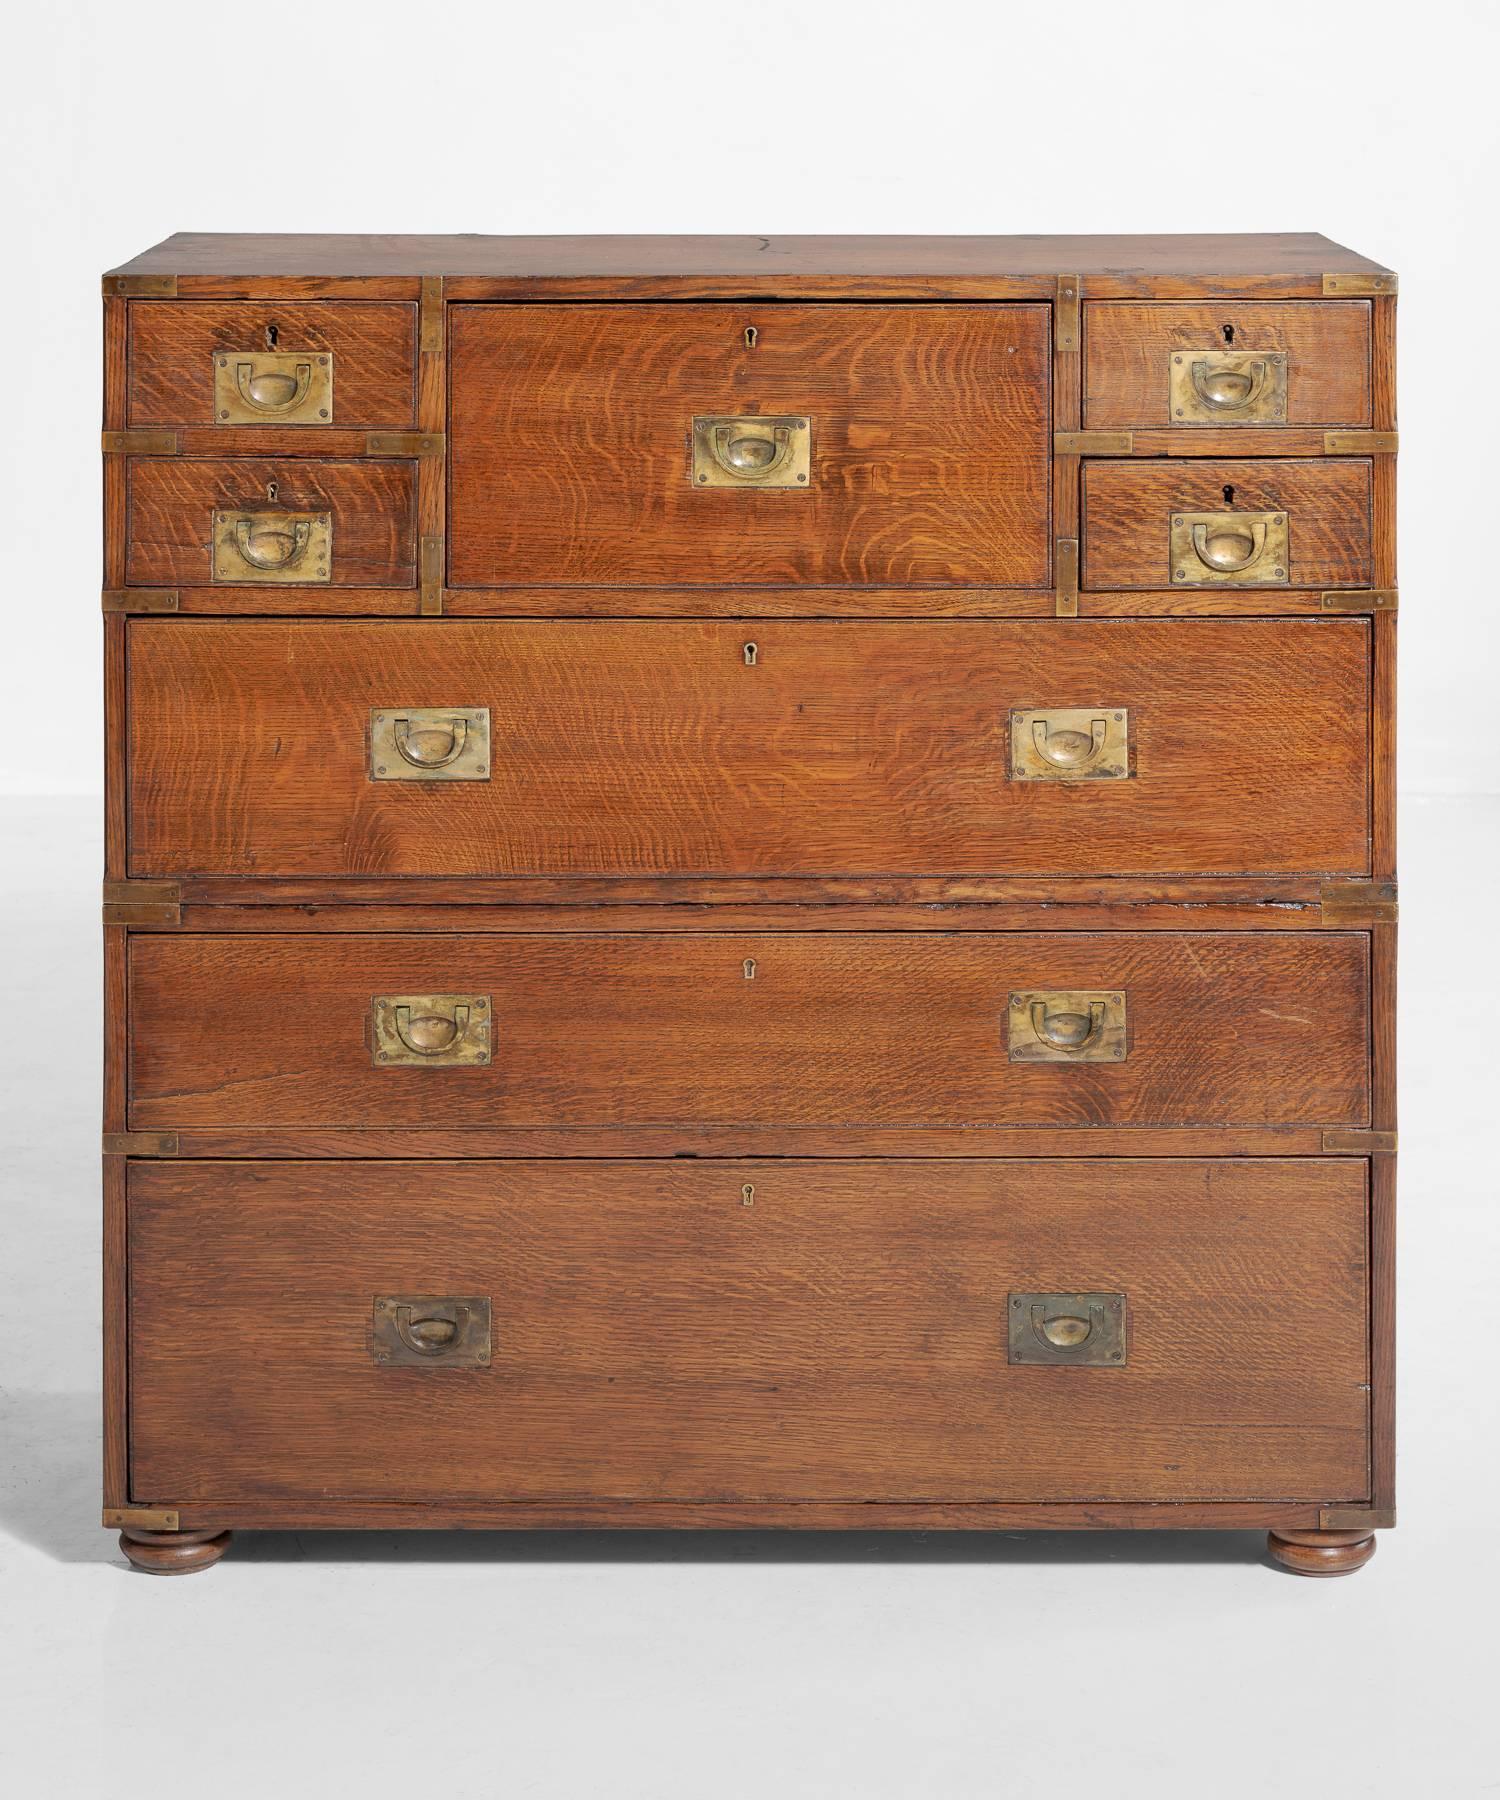 Campaign chest of drawers, circa 1910

Unique oak chest with original brass mounts and hardware.